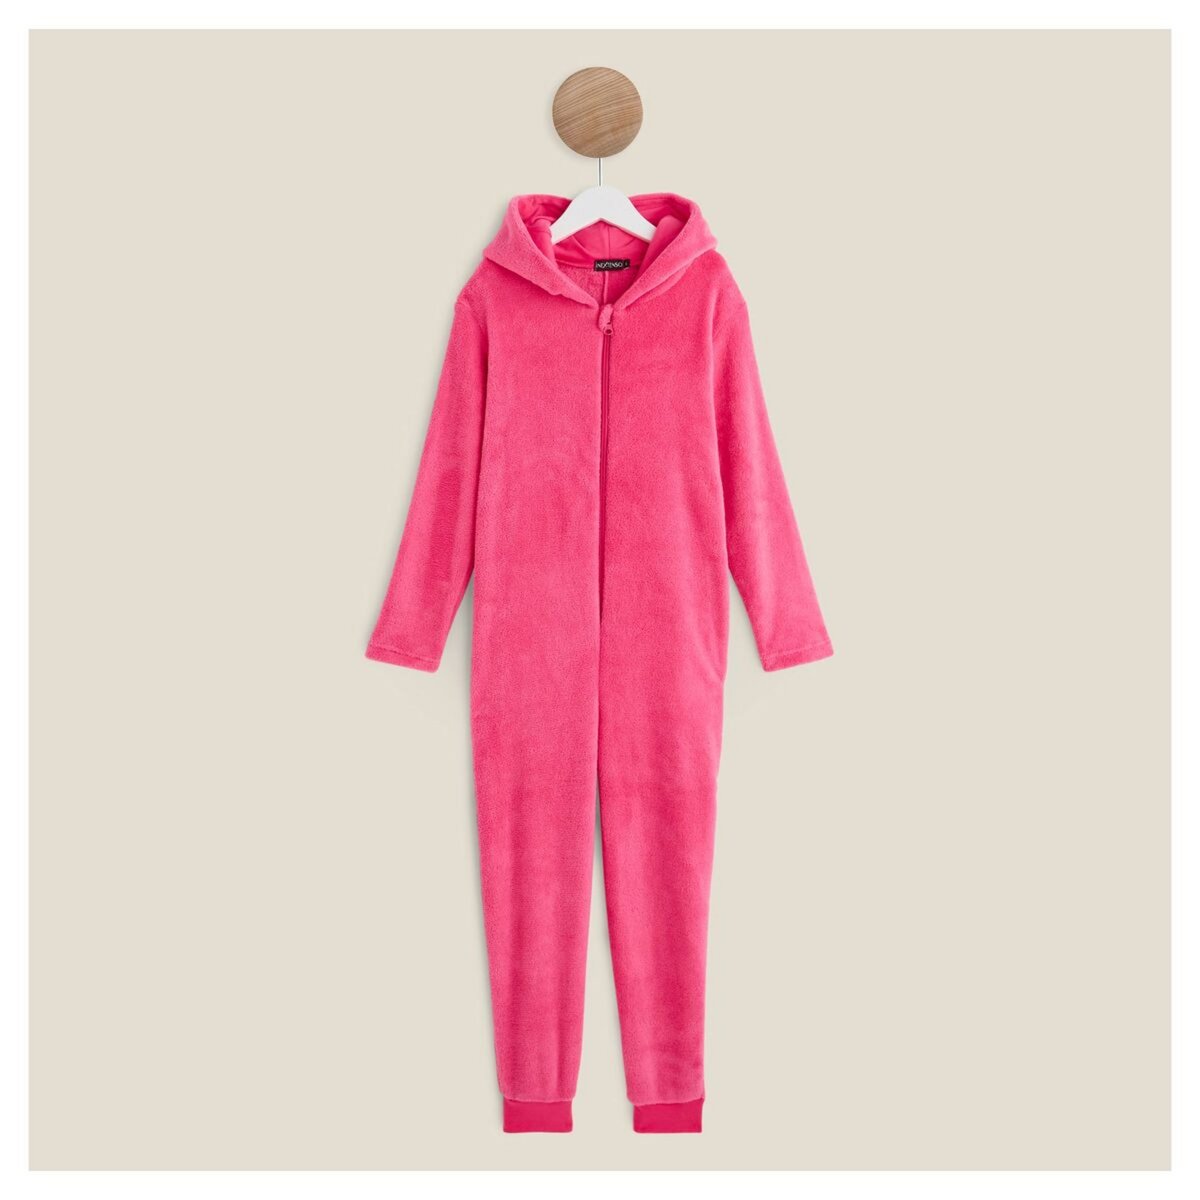 IN EXTENSO Combinaison flamant rose fille 